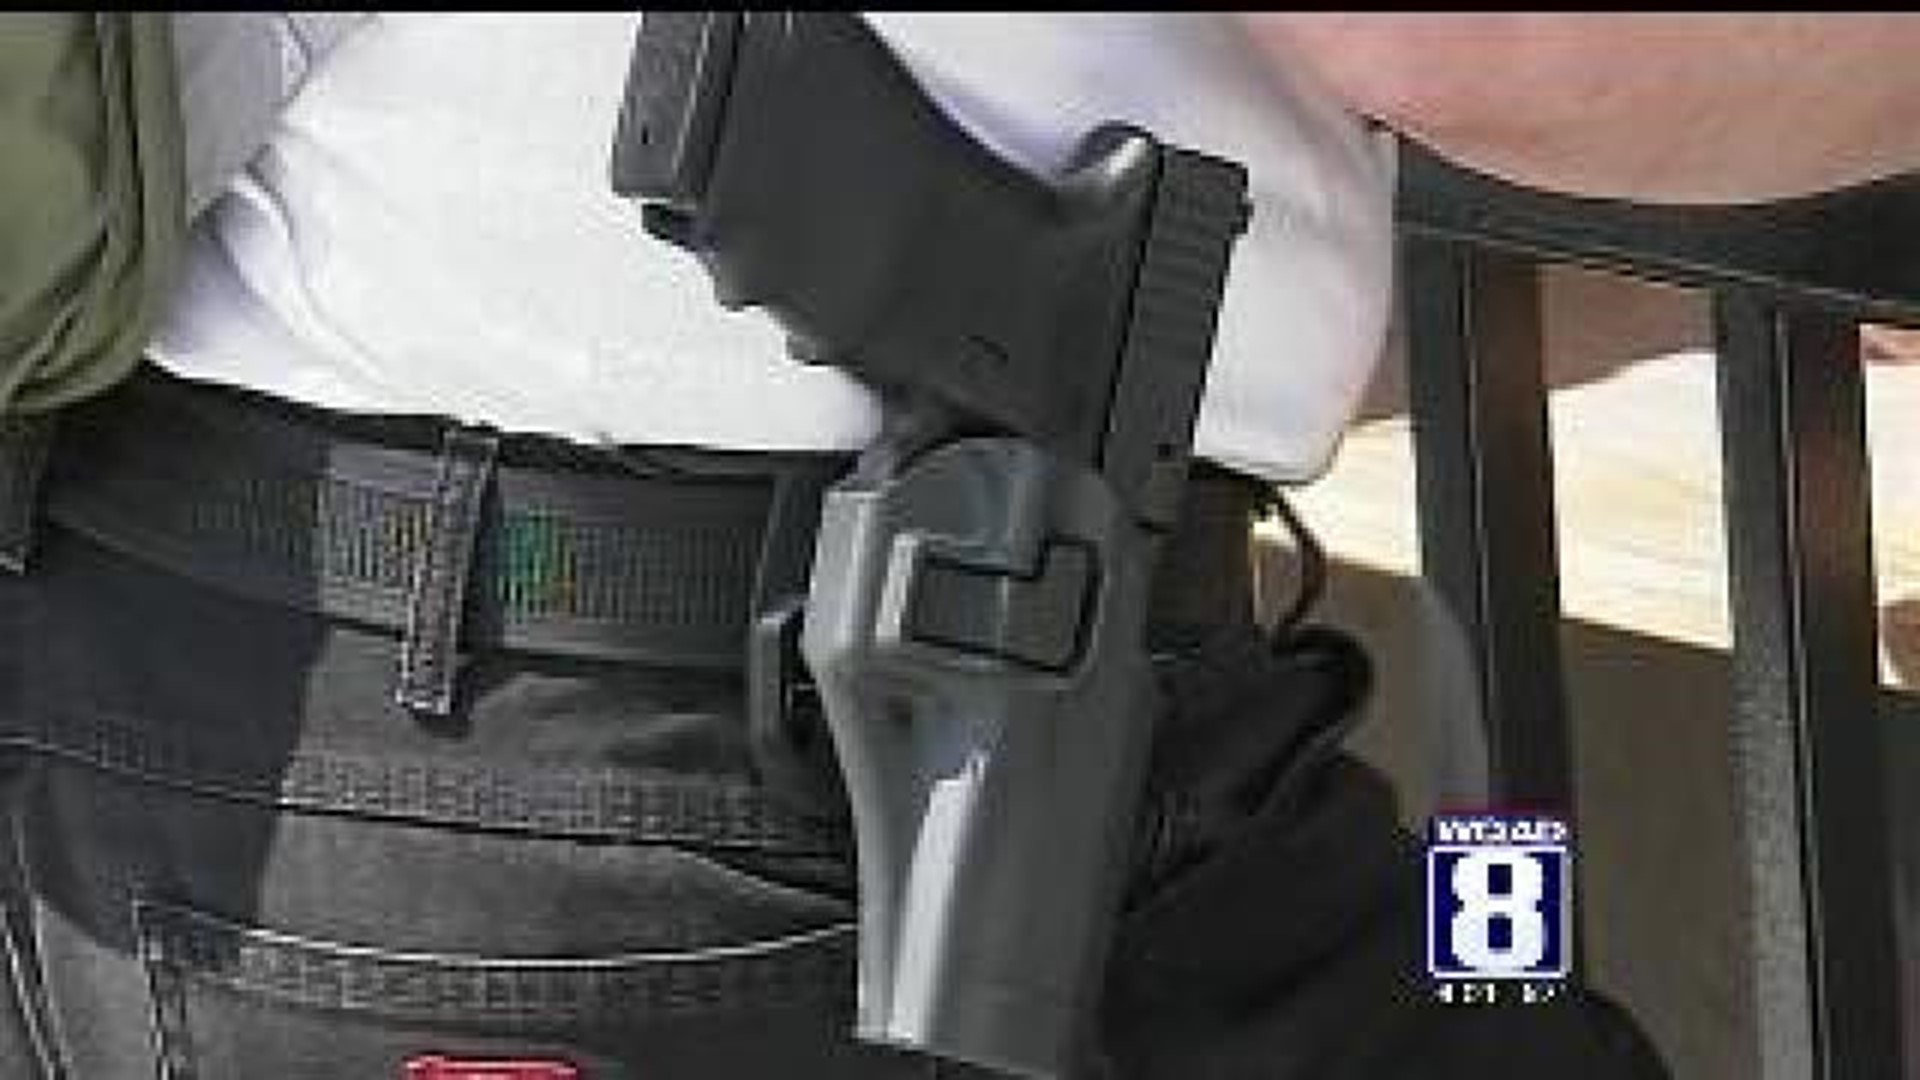 Illinois passes concealed carry law